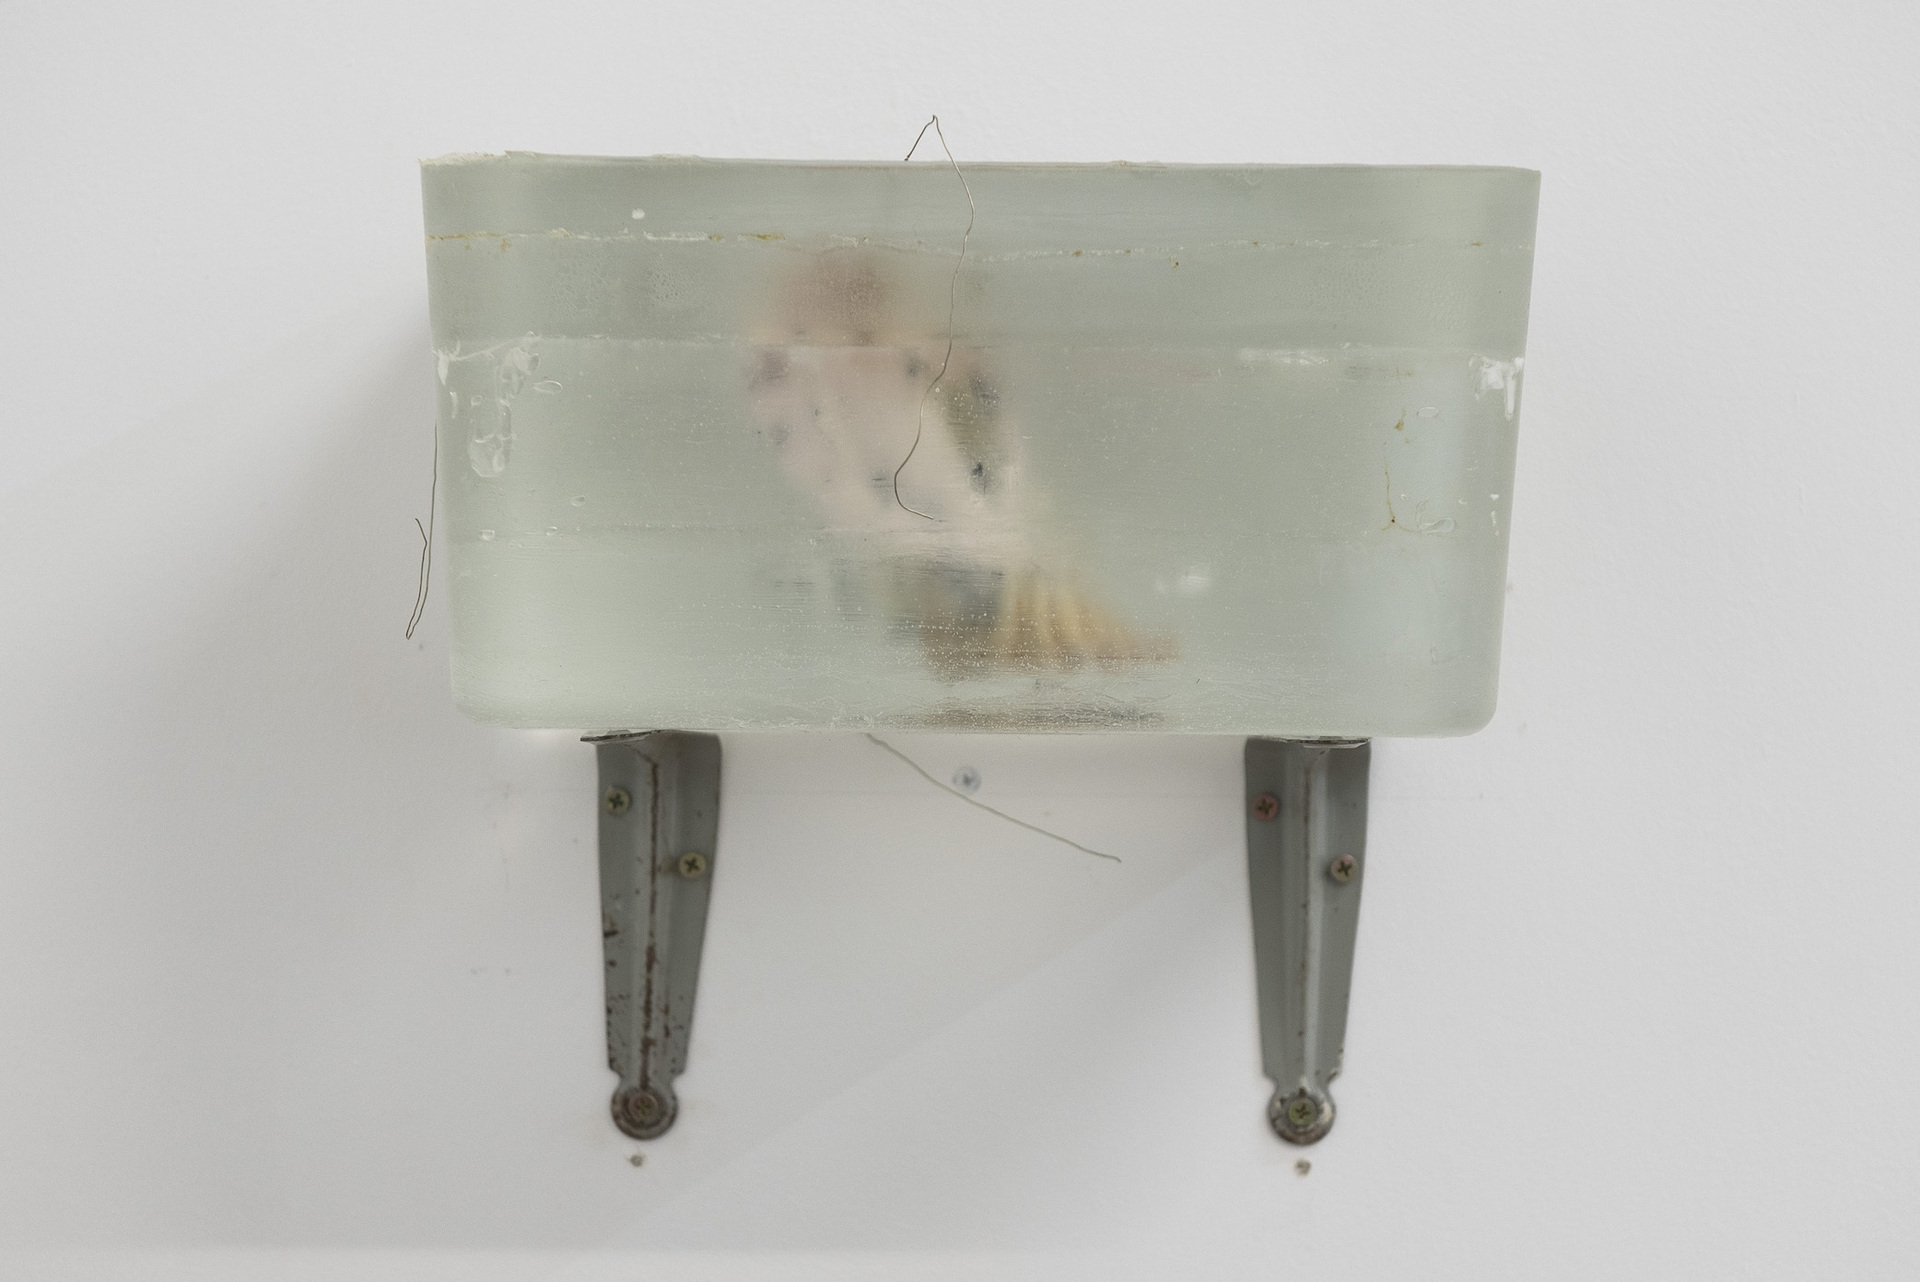 Zoe Jackson, Untitled, 2021, sea shell, chicken breast, beads, wire, sewing pins, lake water, marine hyaluronics, epoxy resin, 20cm x 28cm x 14cm